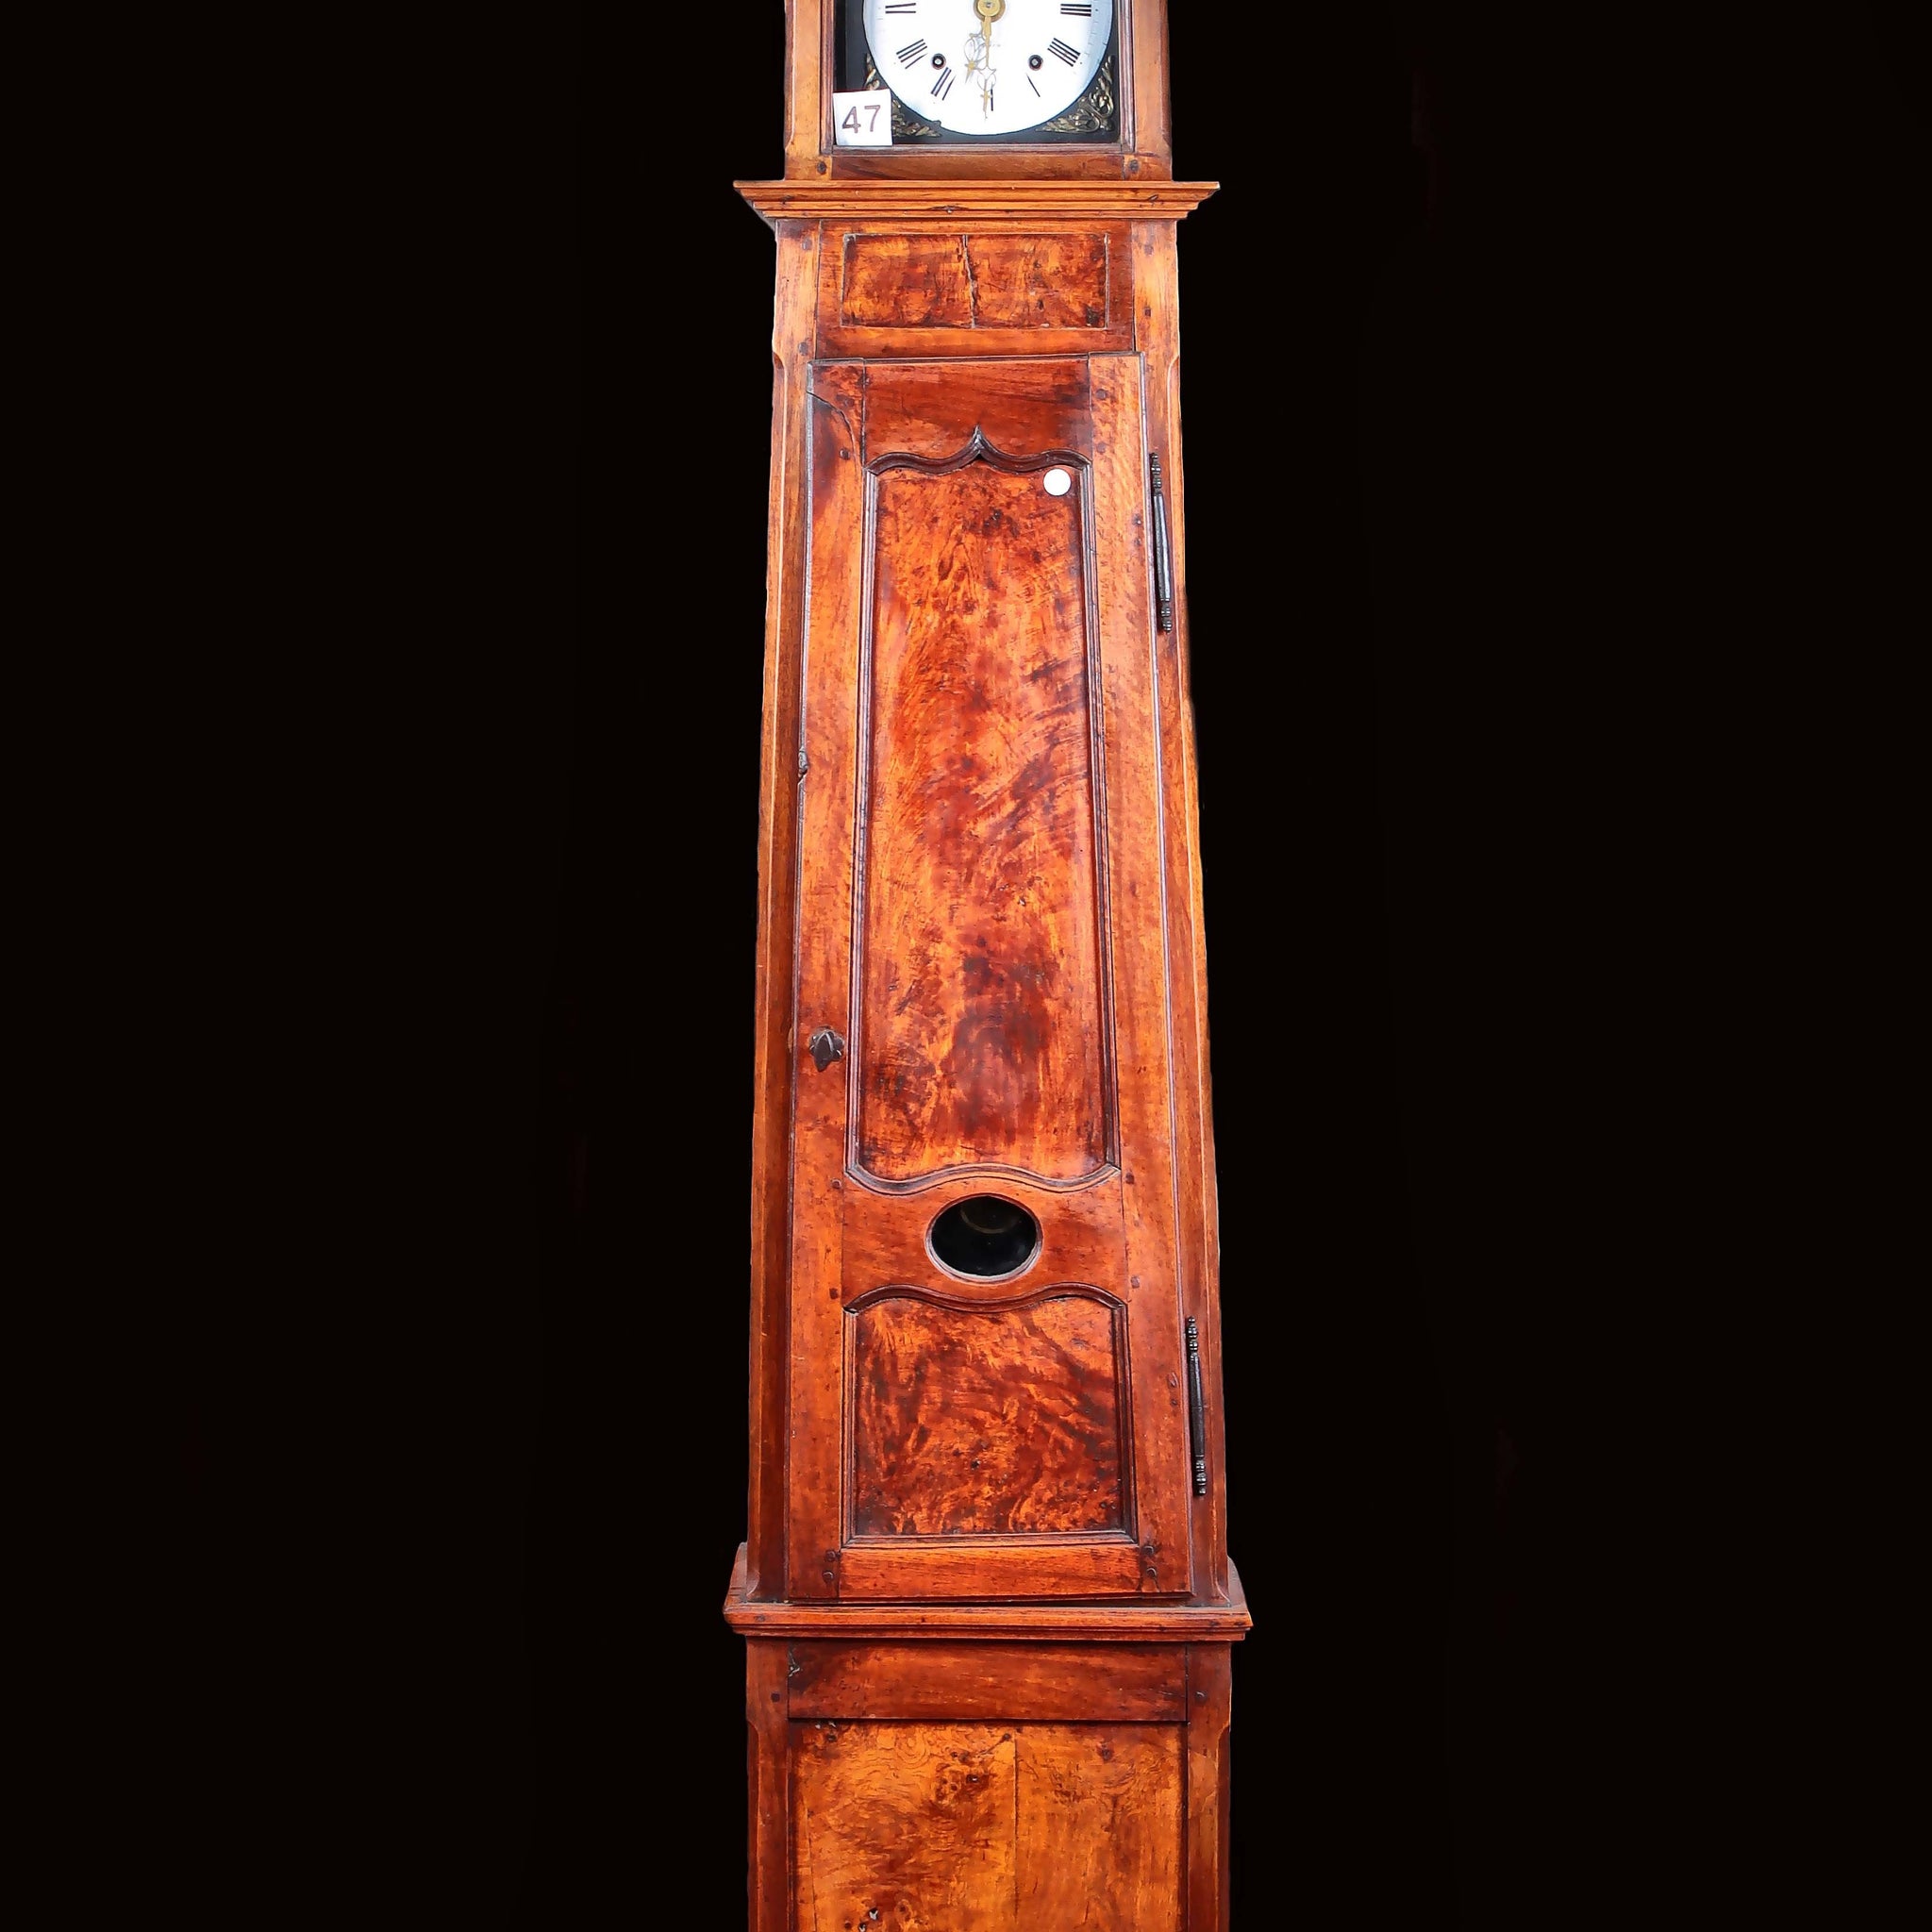 Antique French column clock in cherry wood and elm burl, 1700